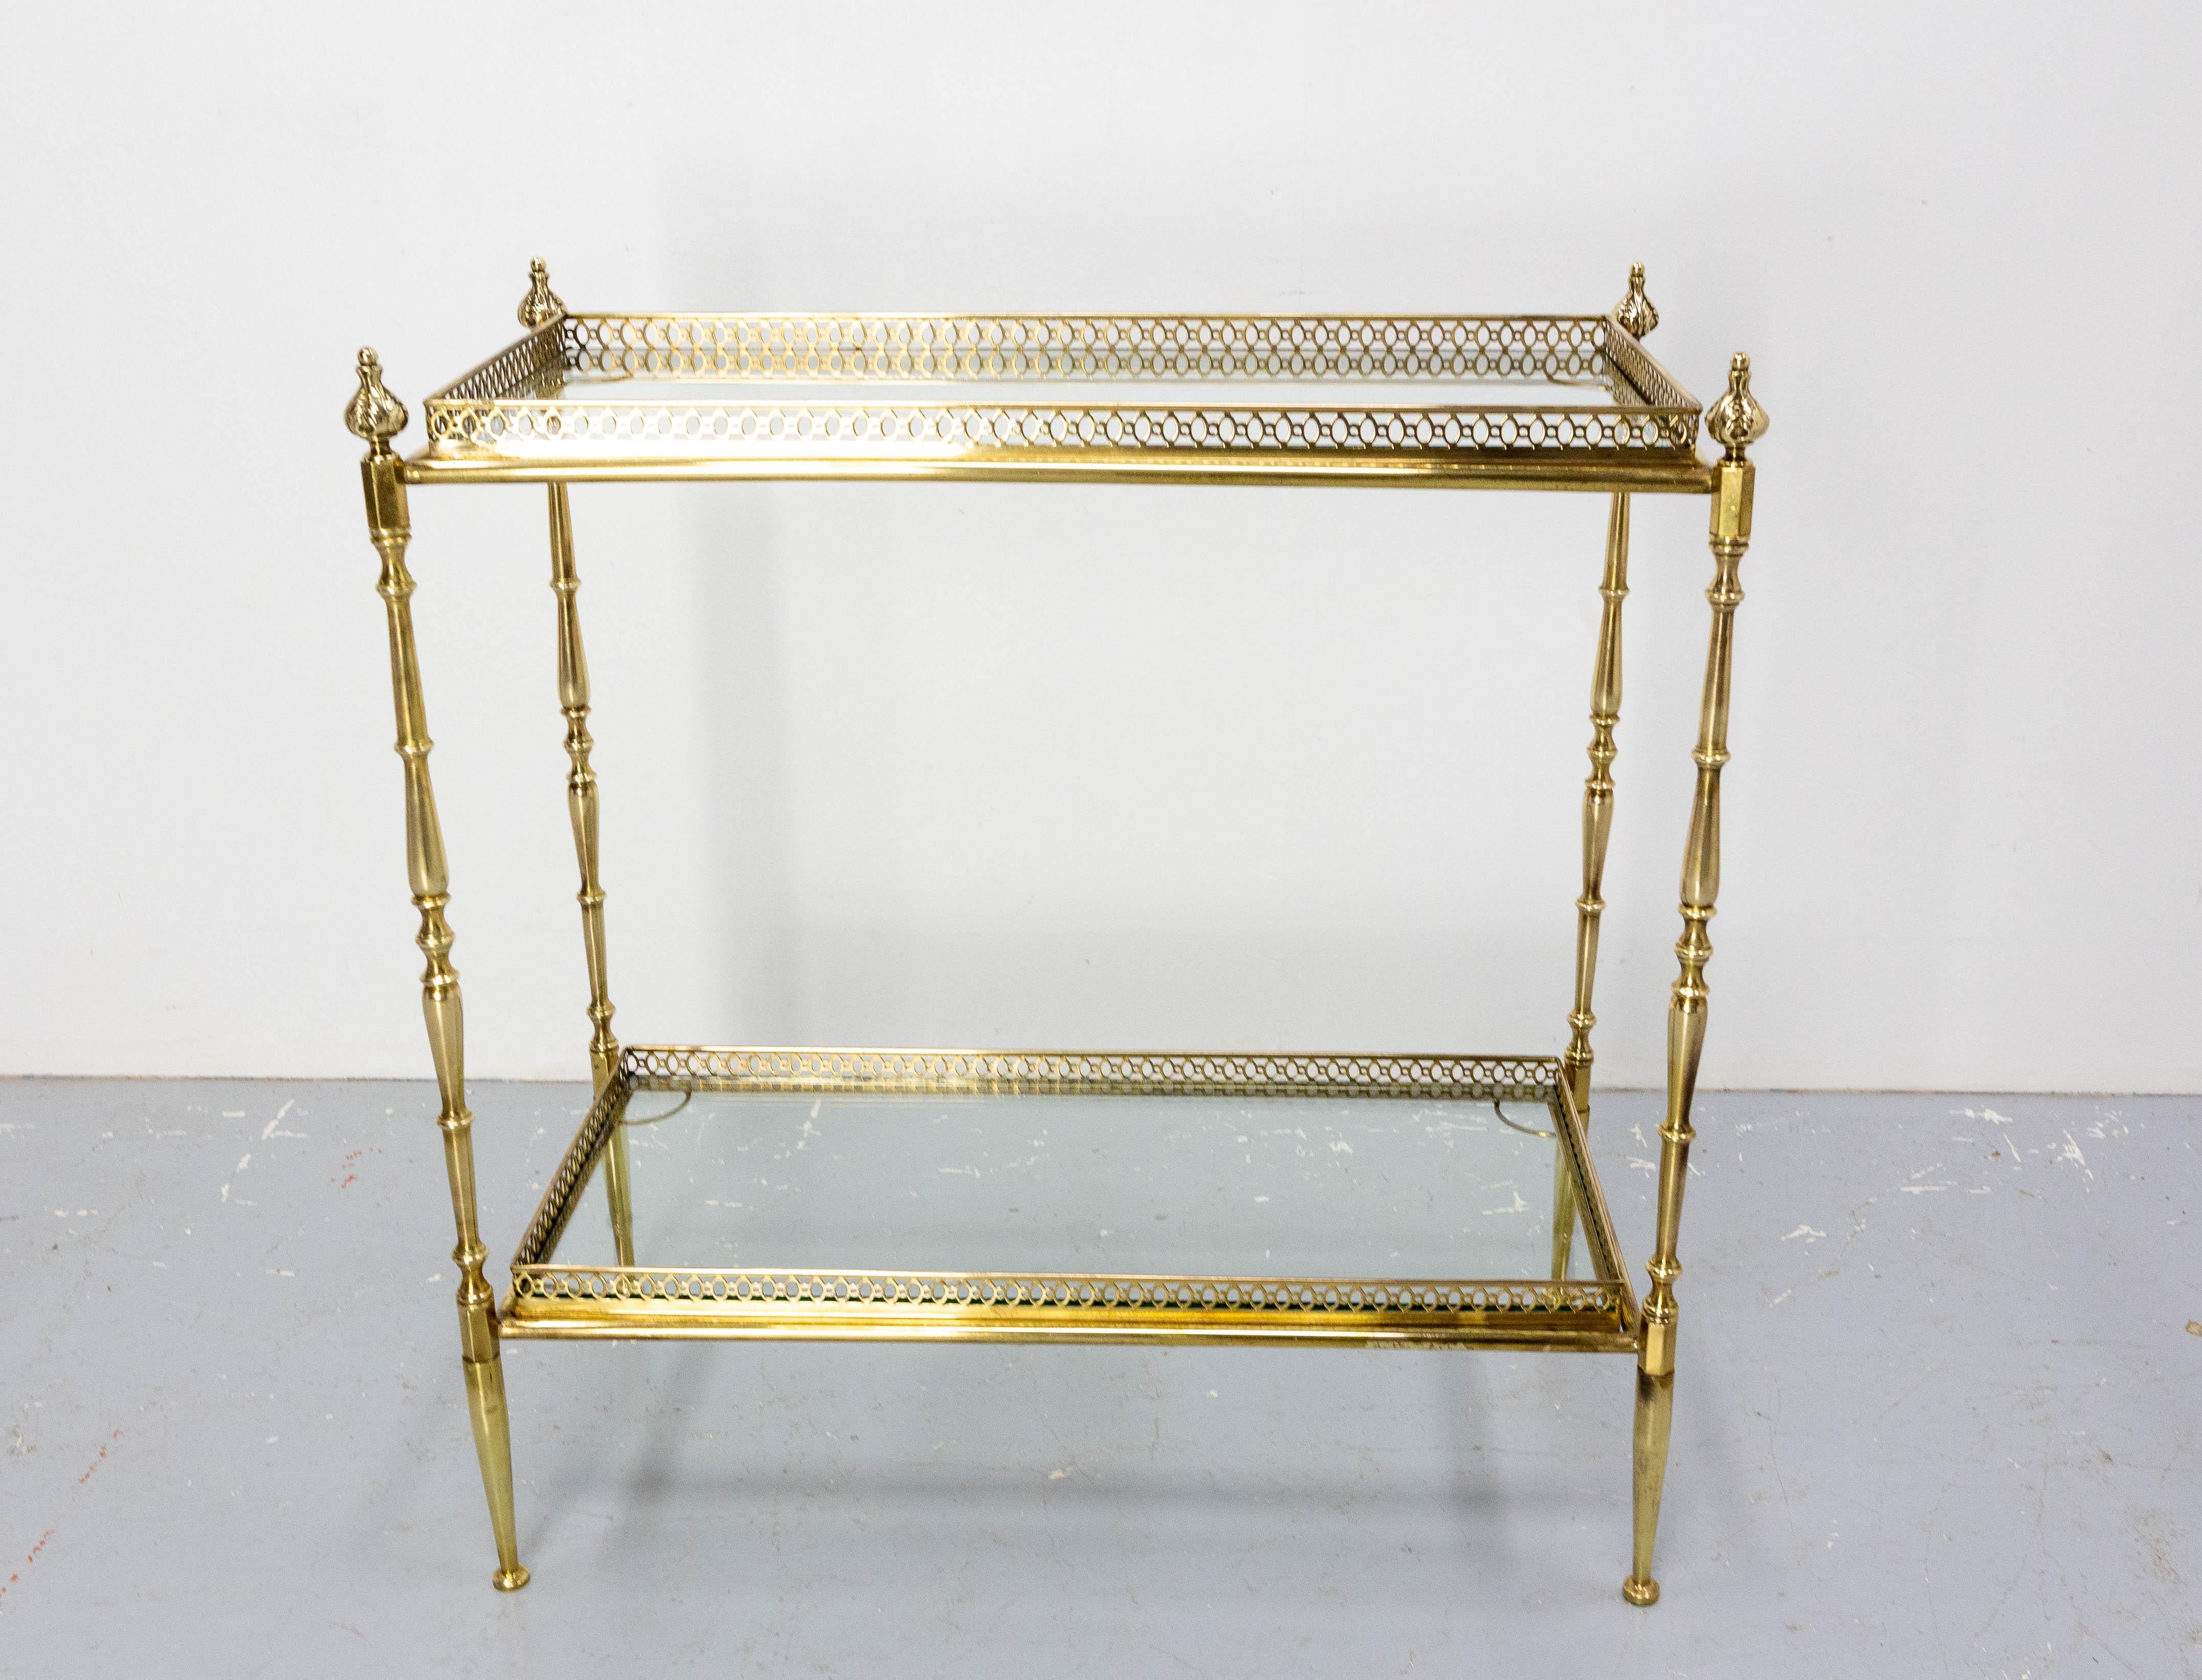 Side table or desserte table glass and brass. 
Made circa in the Jansen style.
The use of only glass and brass materials gives this a very airy appearance.
Nice patina.
French.
Good antique condition with few marks of use.

